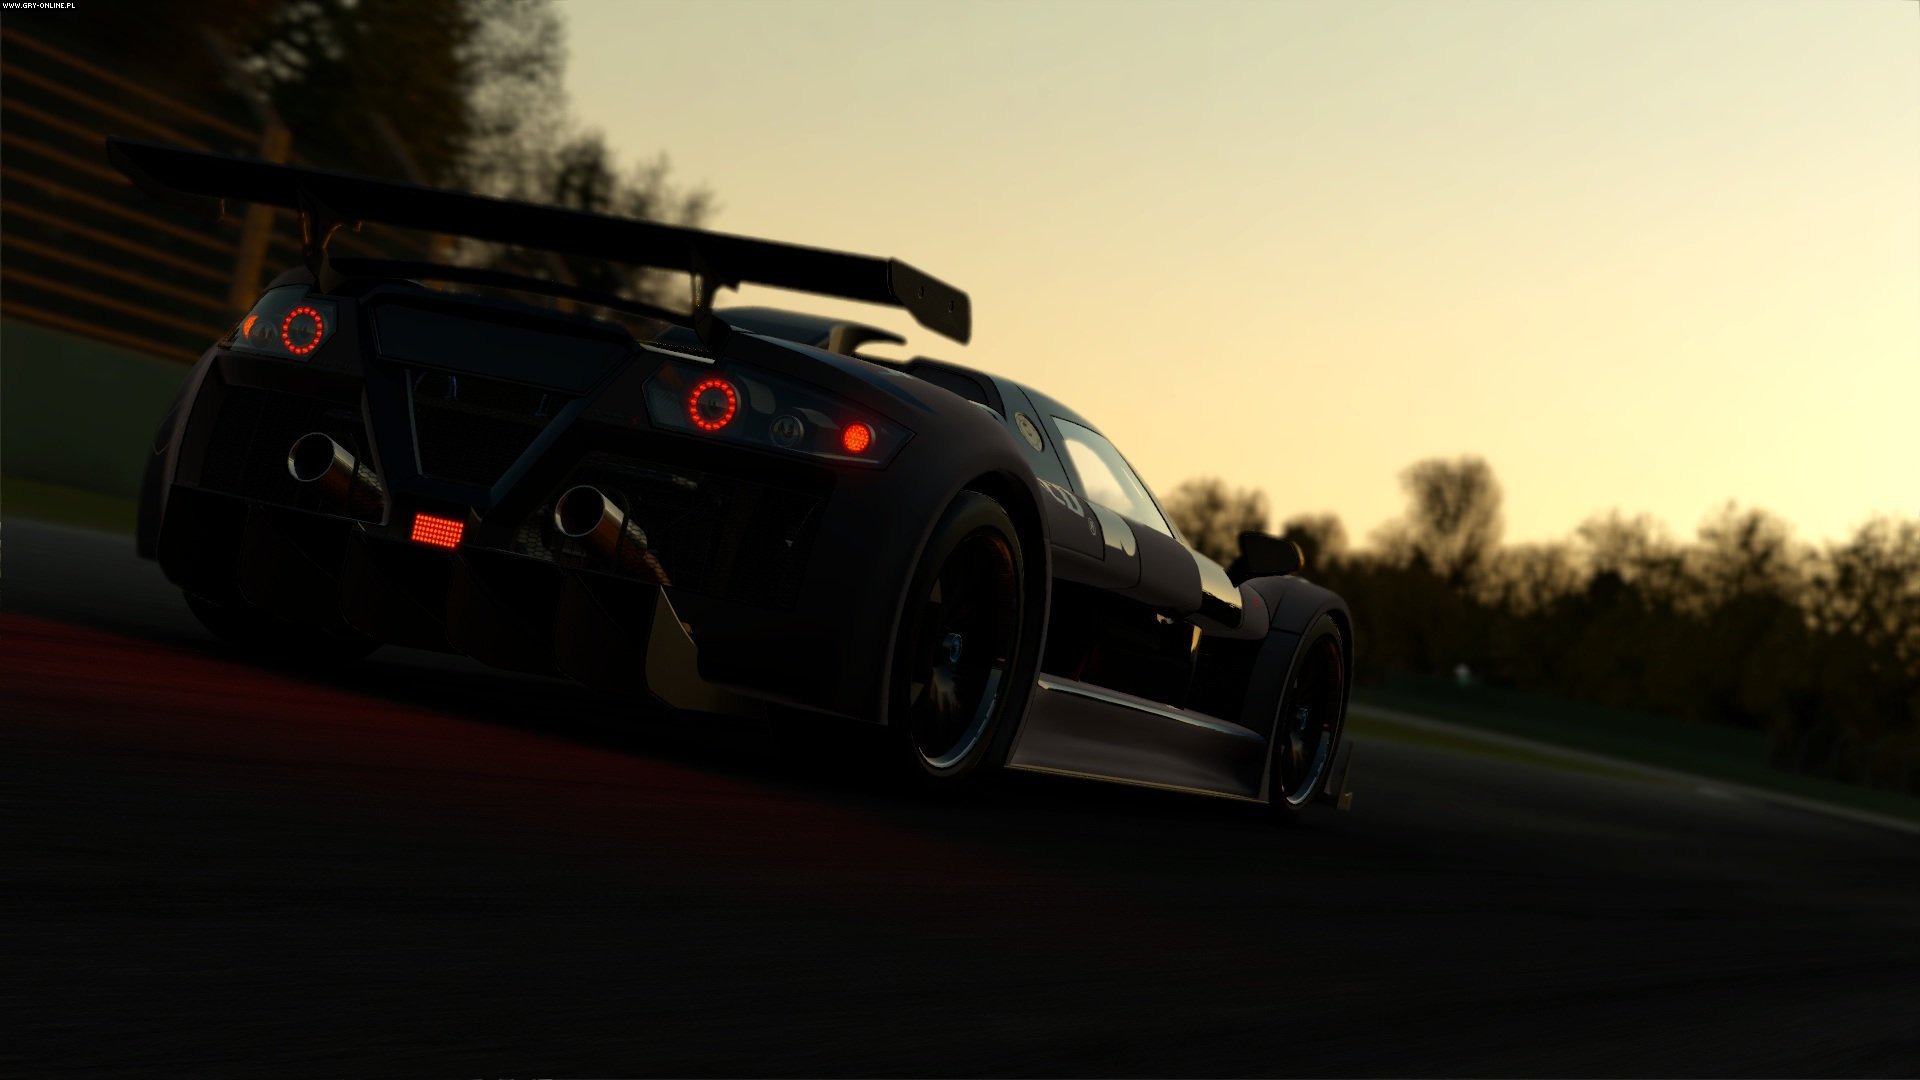 Video Game Project Cars Wallpaper:1920x1080